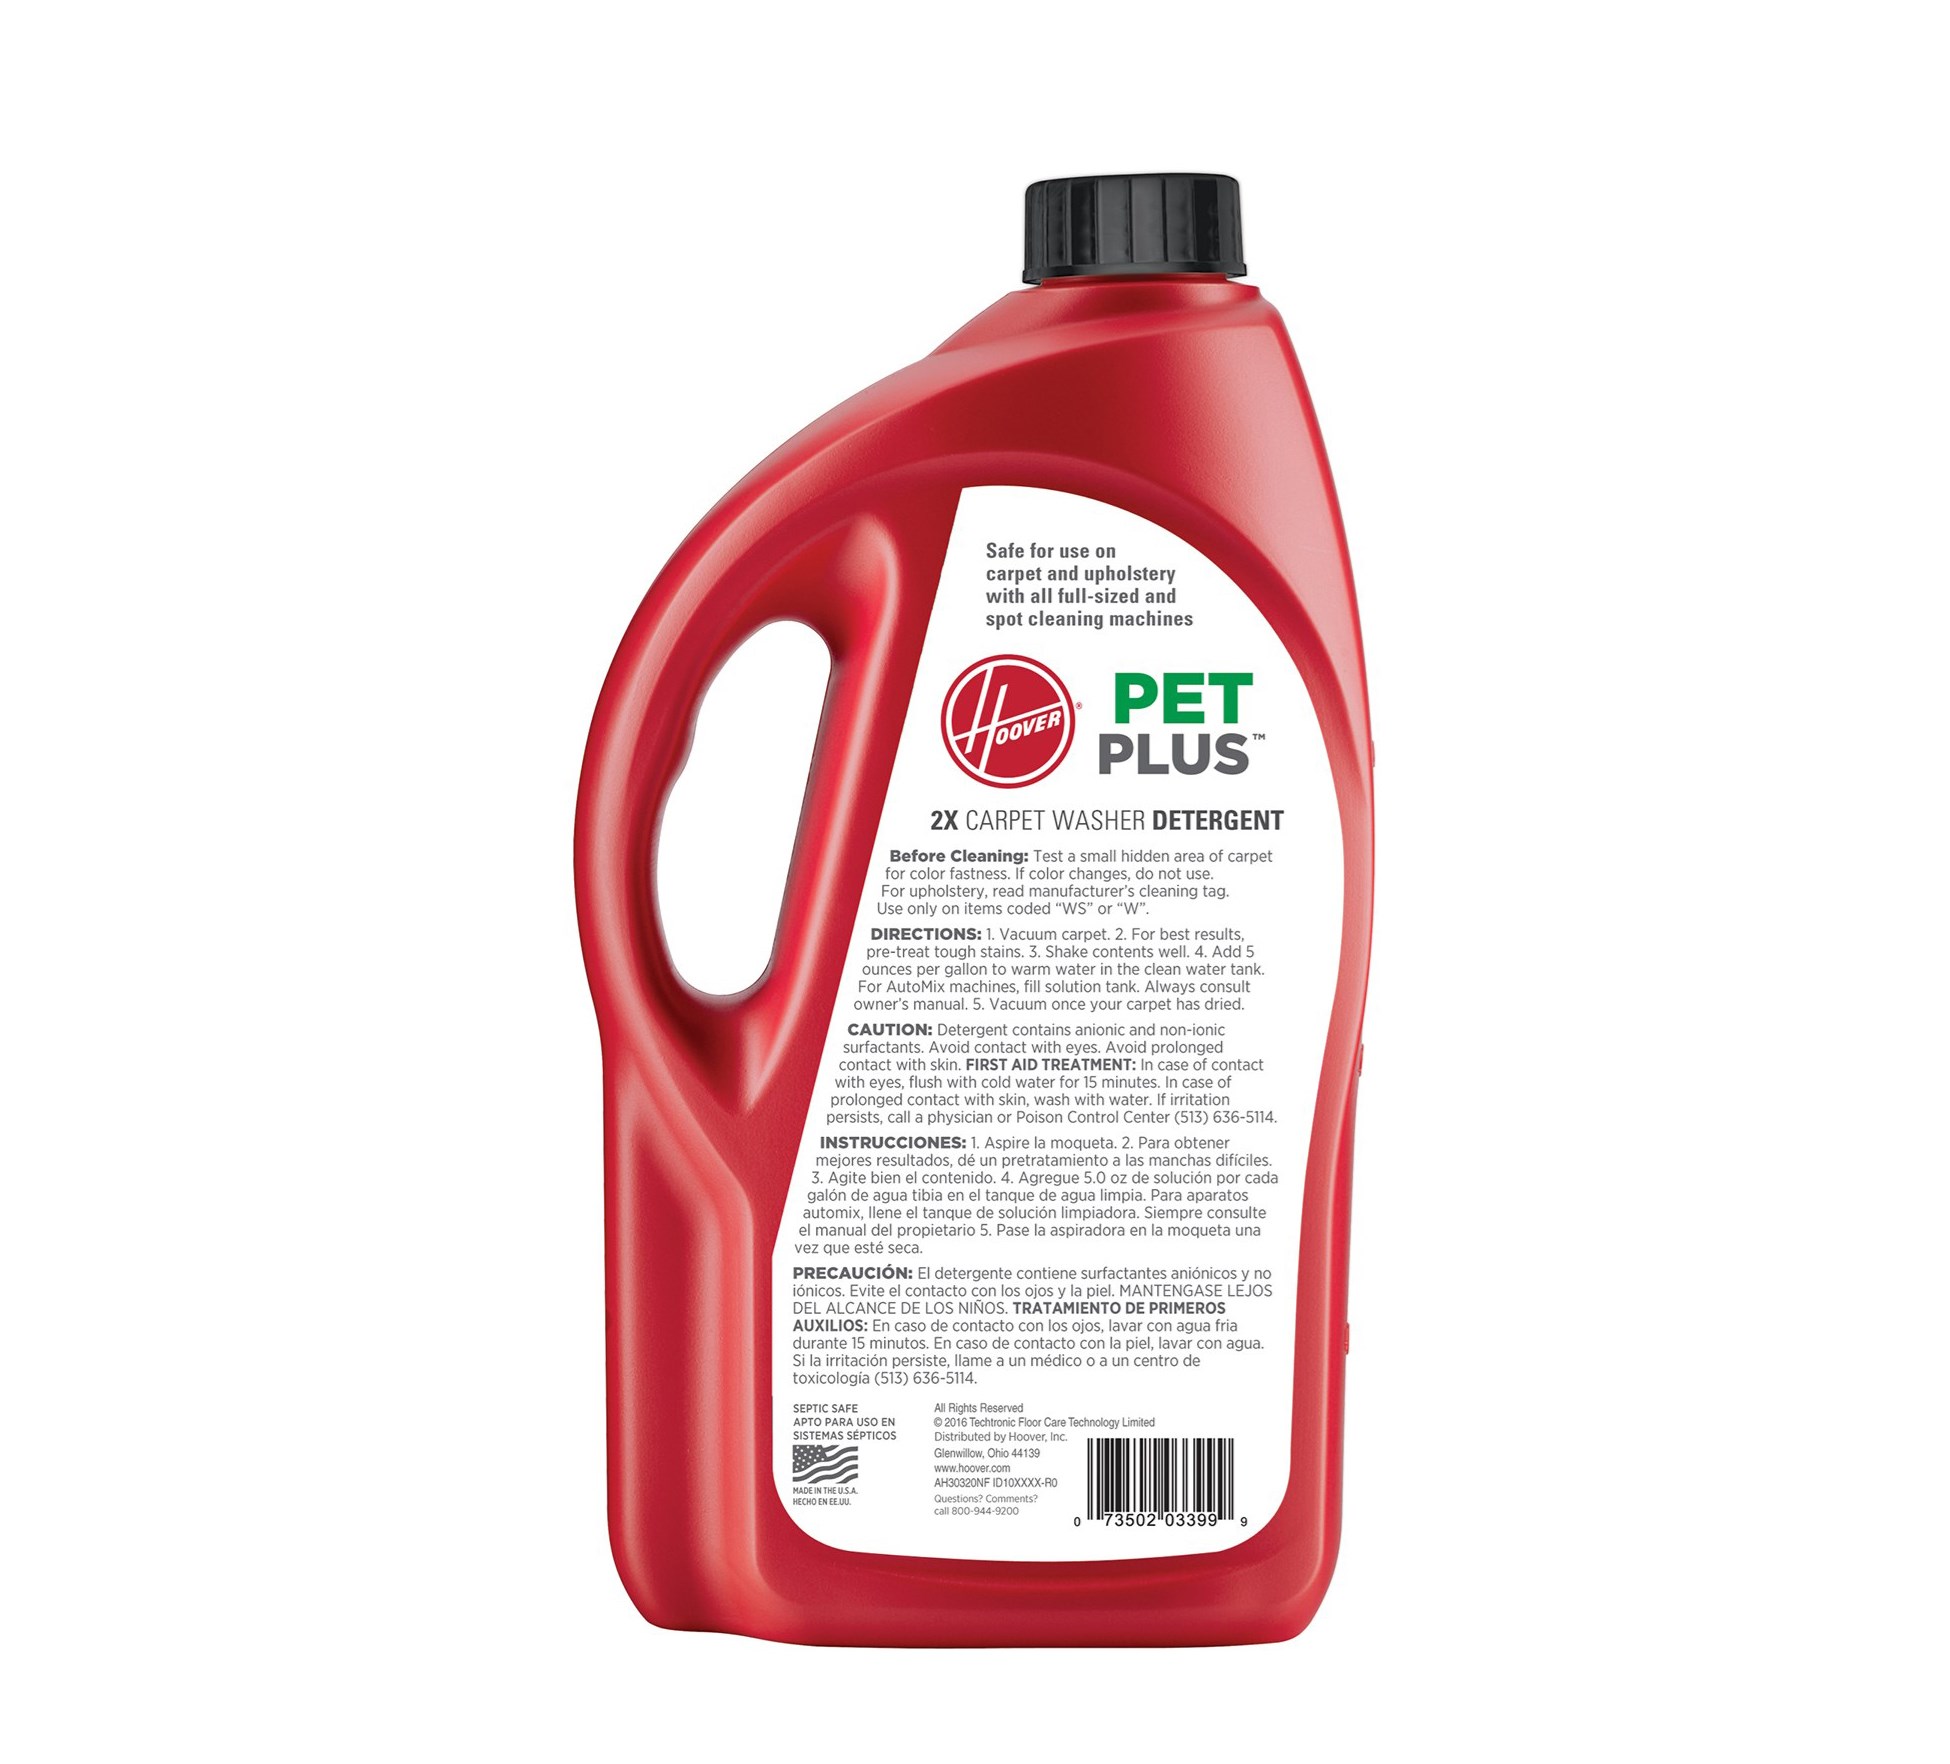 Hoover 2X PetPlus Pet Stain & Odor Remover 64 oz, AH30320 - image 2 of 3